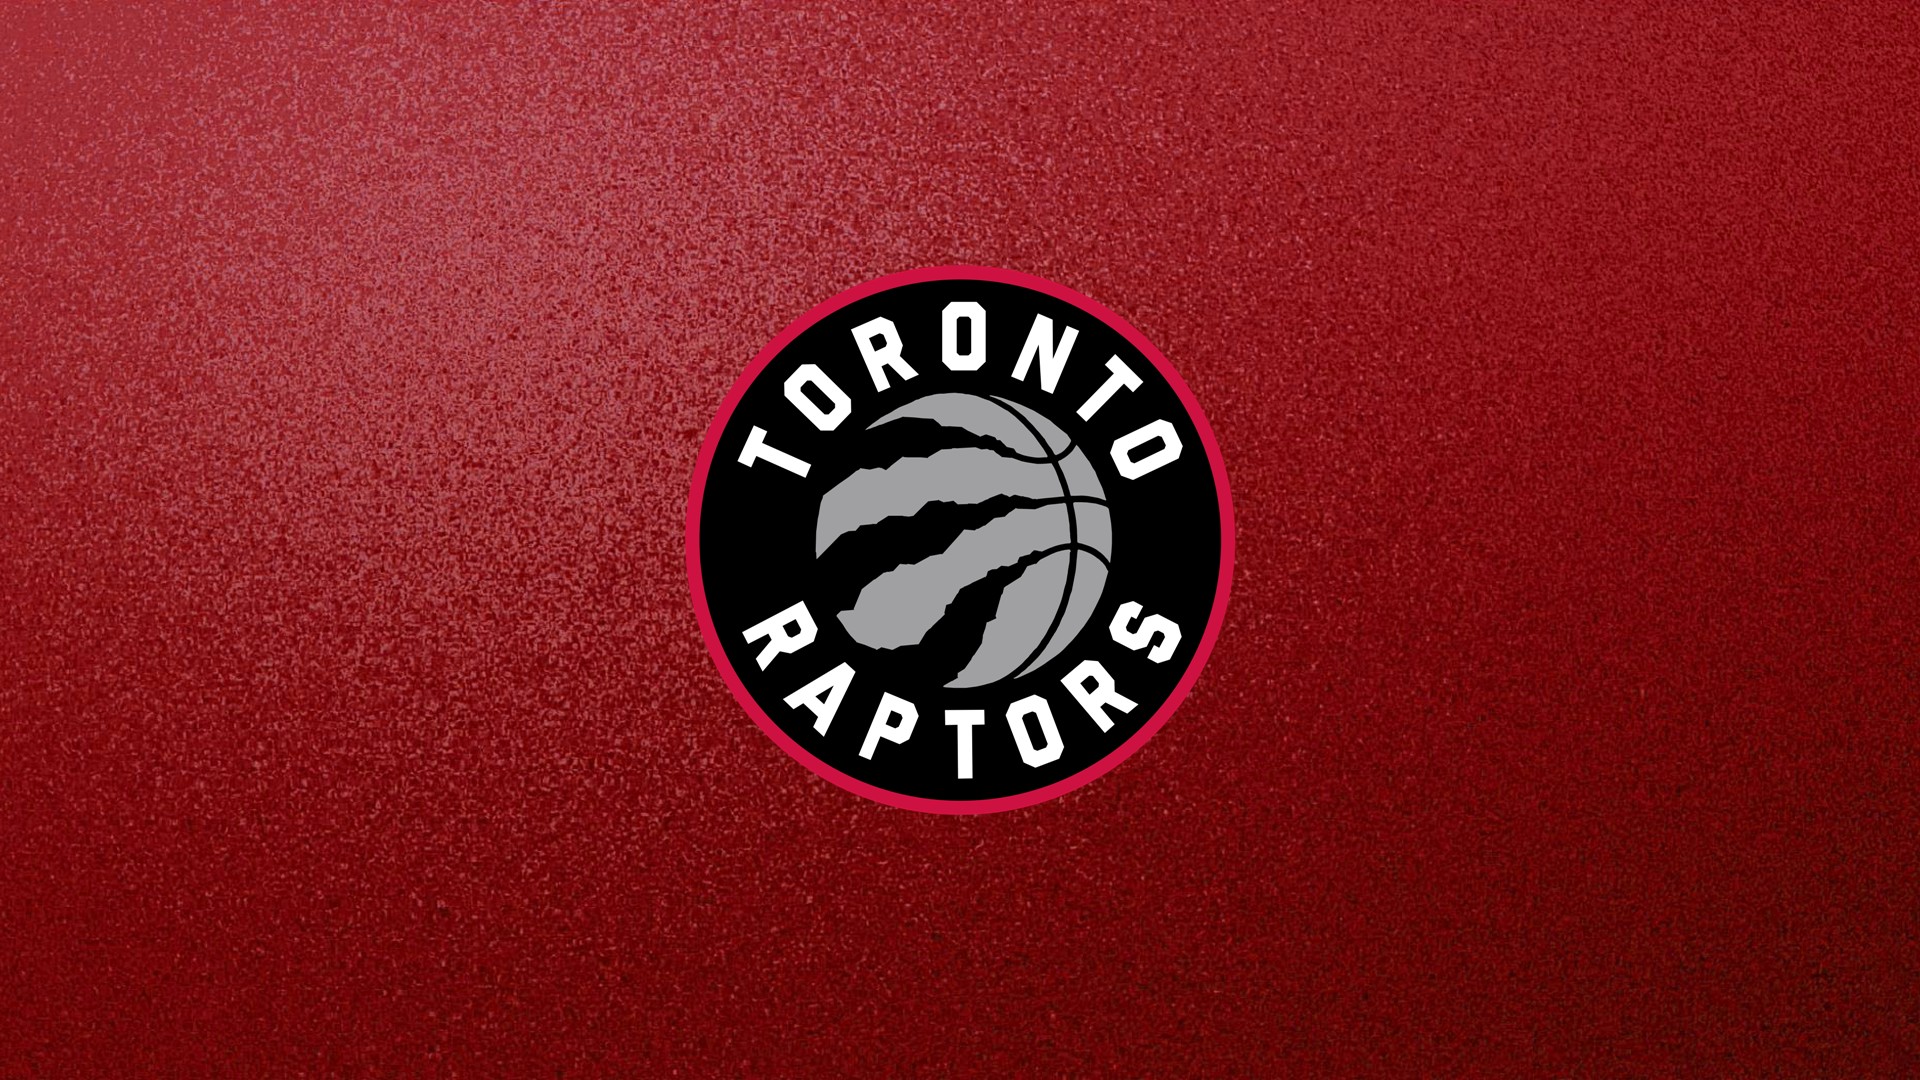 Toronto Raptors HD Backgrounds with image resolution 1920x1080 pixel. You can make this wallpaper for your Desktop Computer Backgrounds, Mac Wallpapers, Android Lock screen or iPhone Screensavers